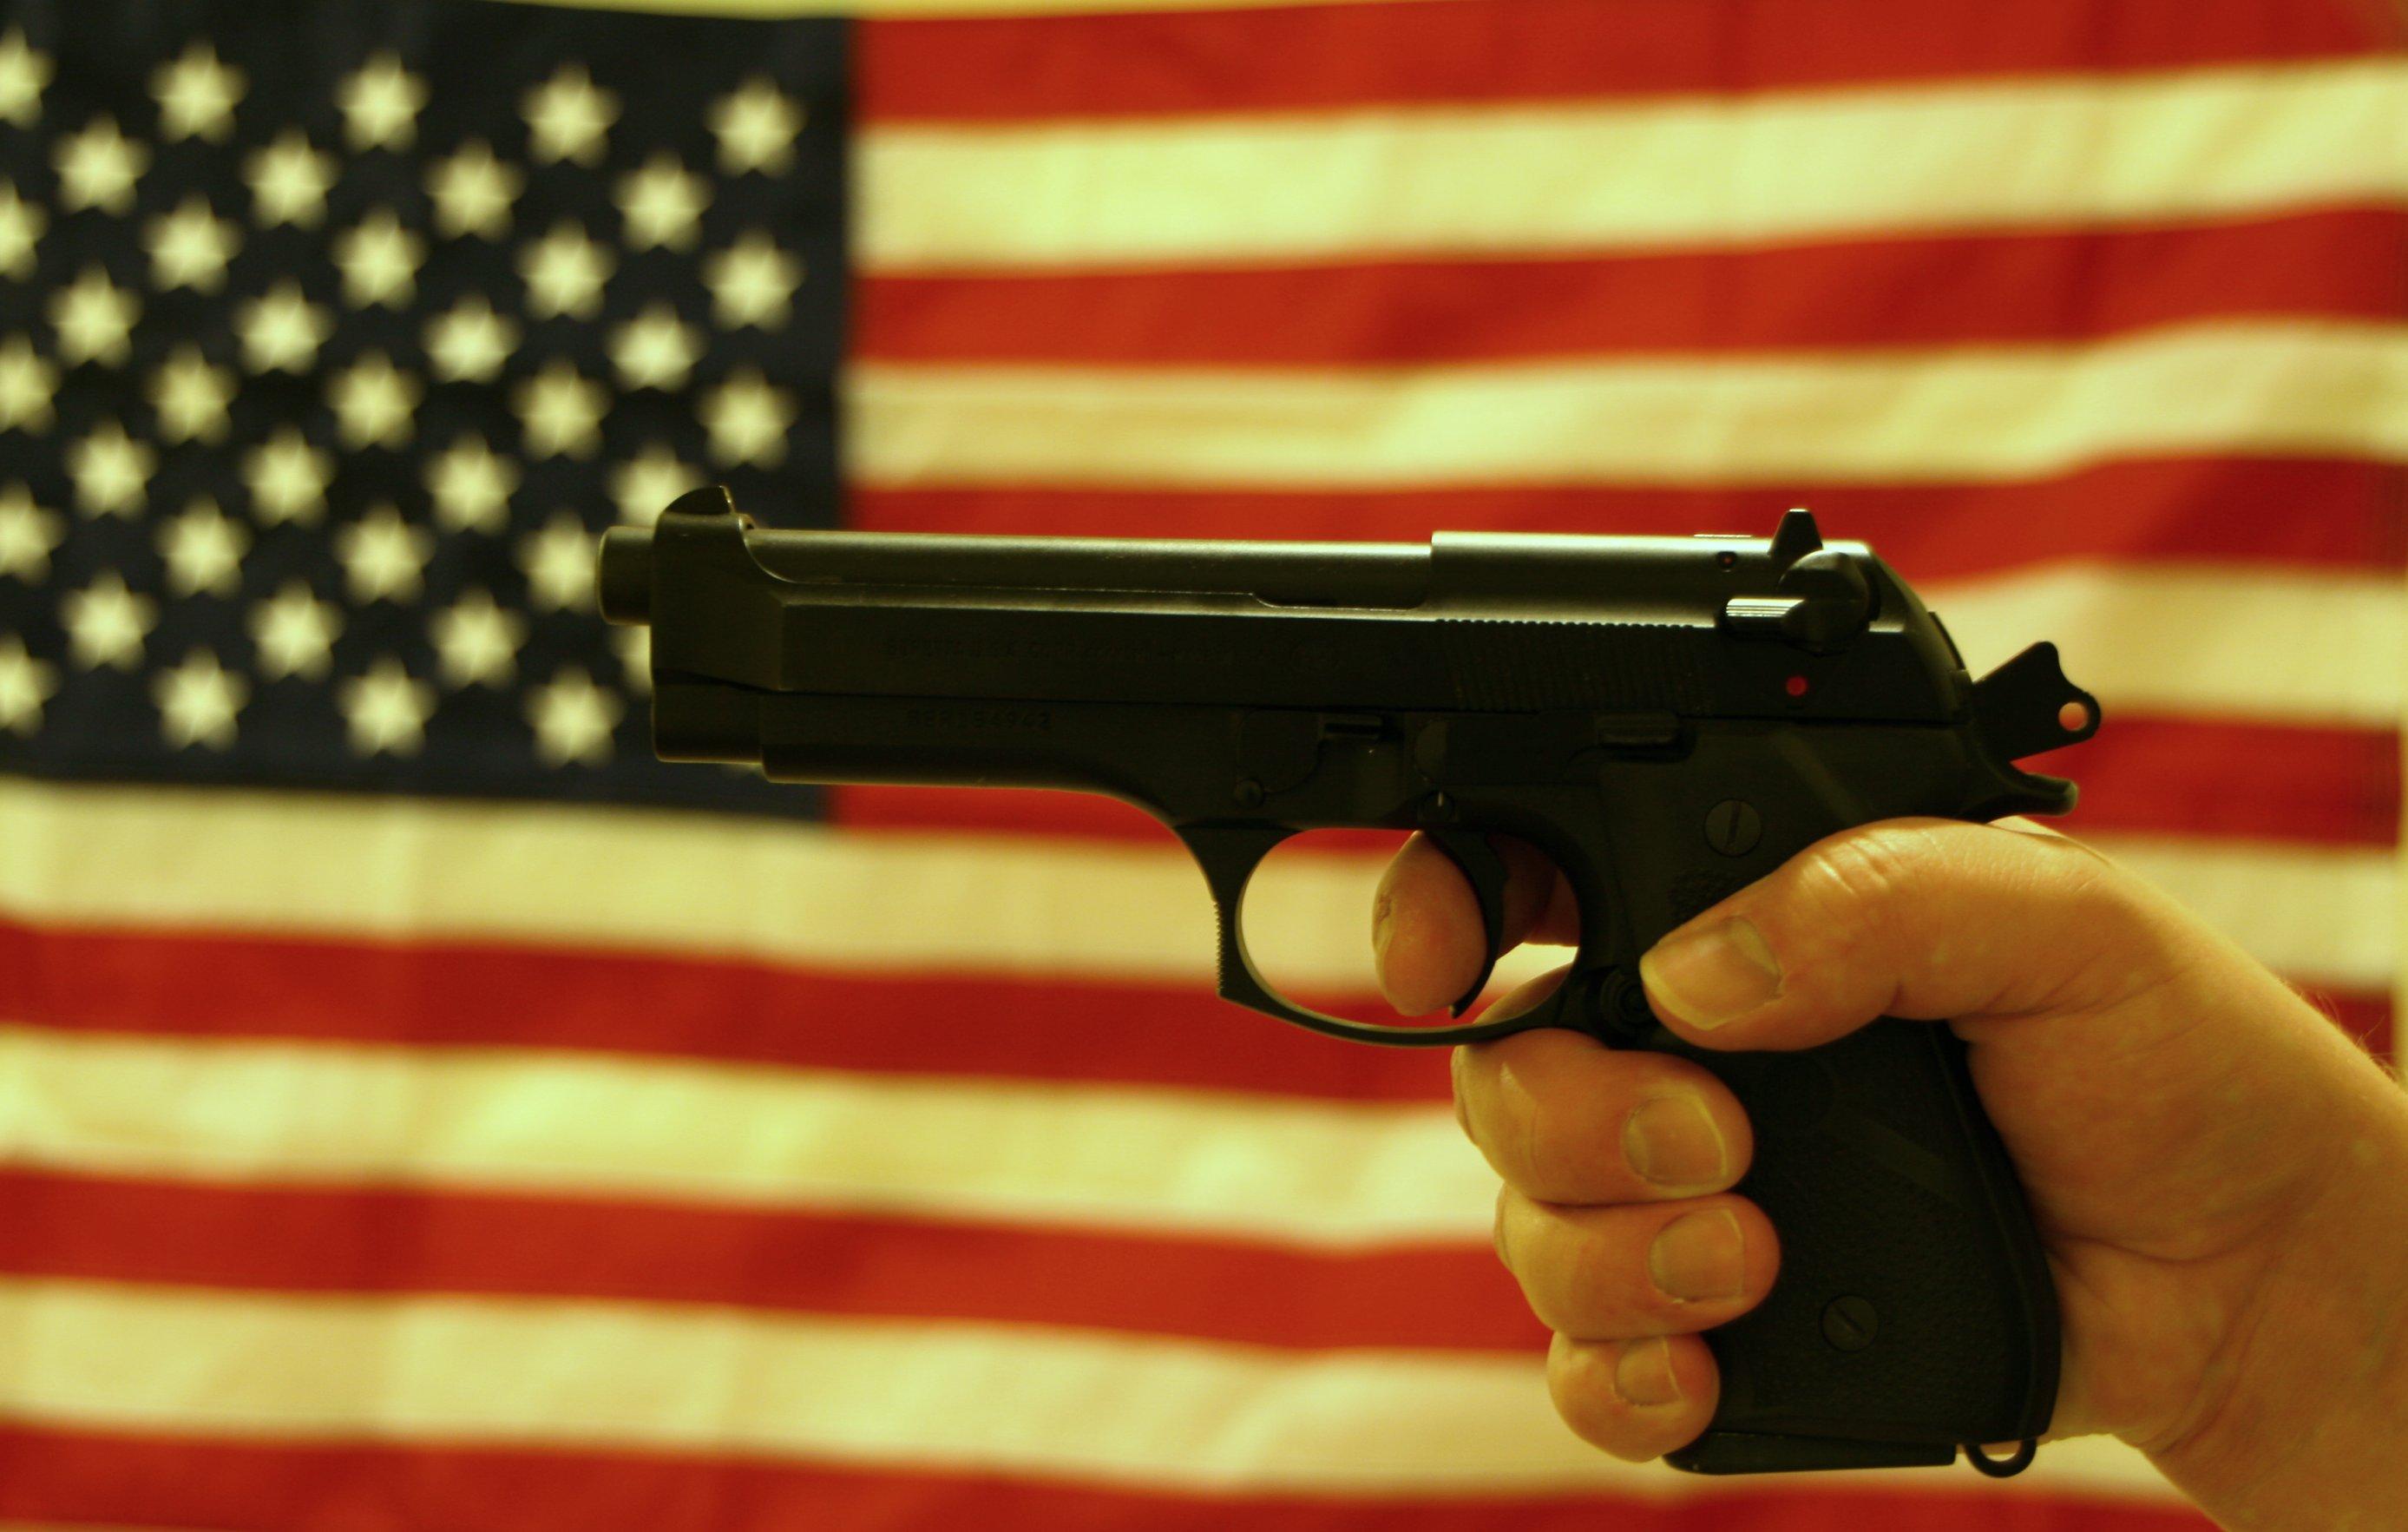 A hand gripping a handgun in front of an American flag backdrop